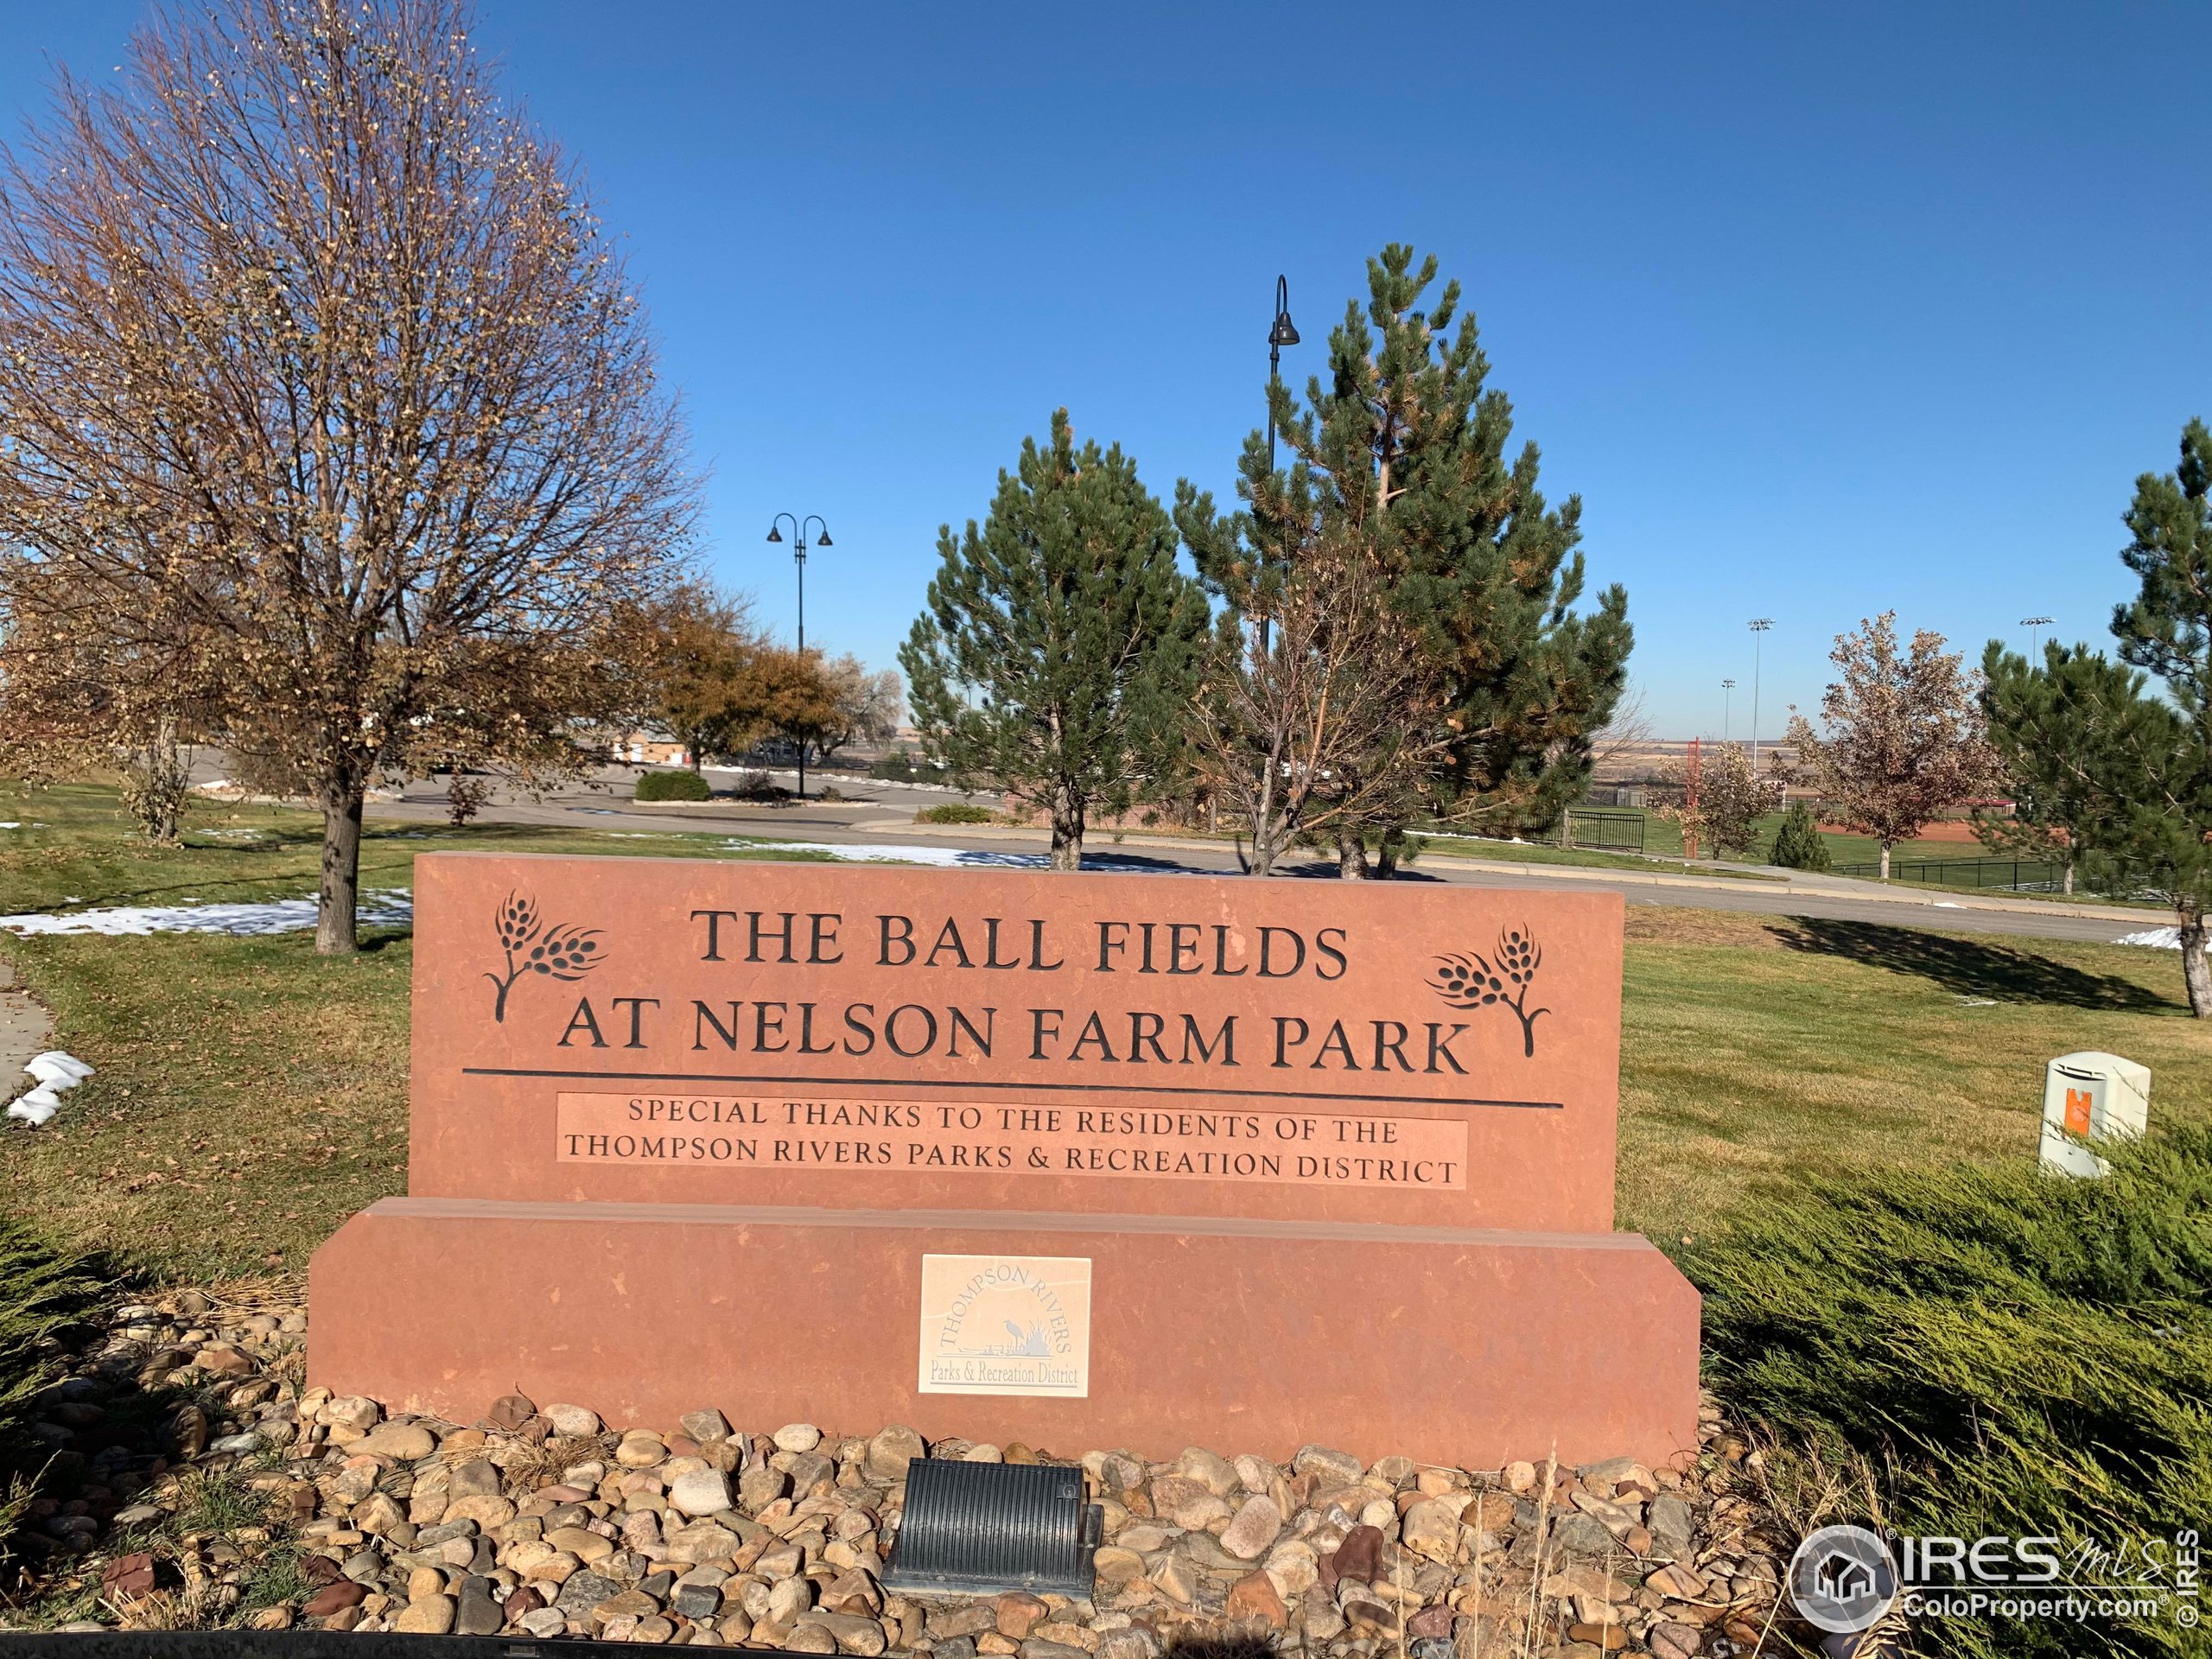 Walking distance to the ballfields at Nelson Farm Park